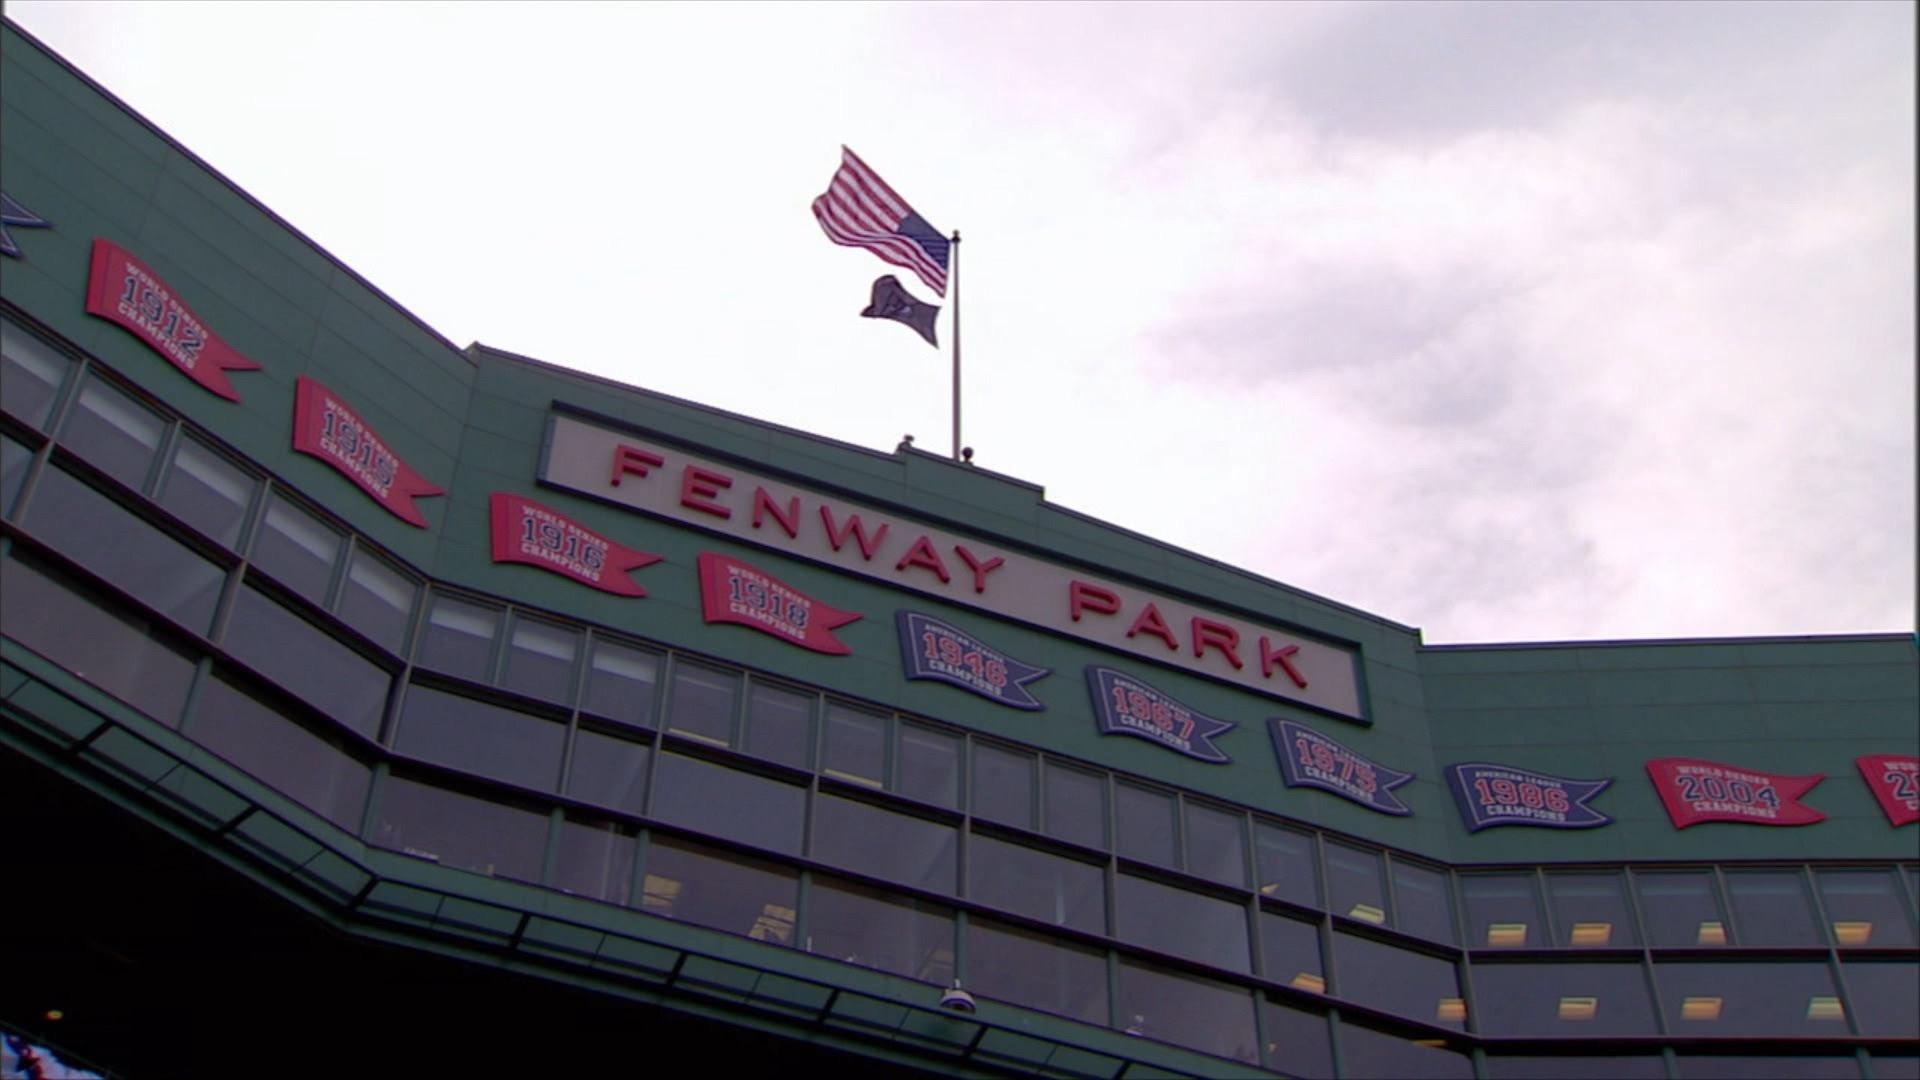 Here's how to win your dad a free Father's Day at Fenway Park